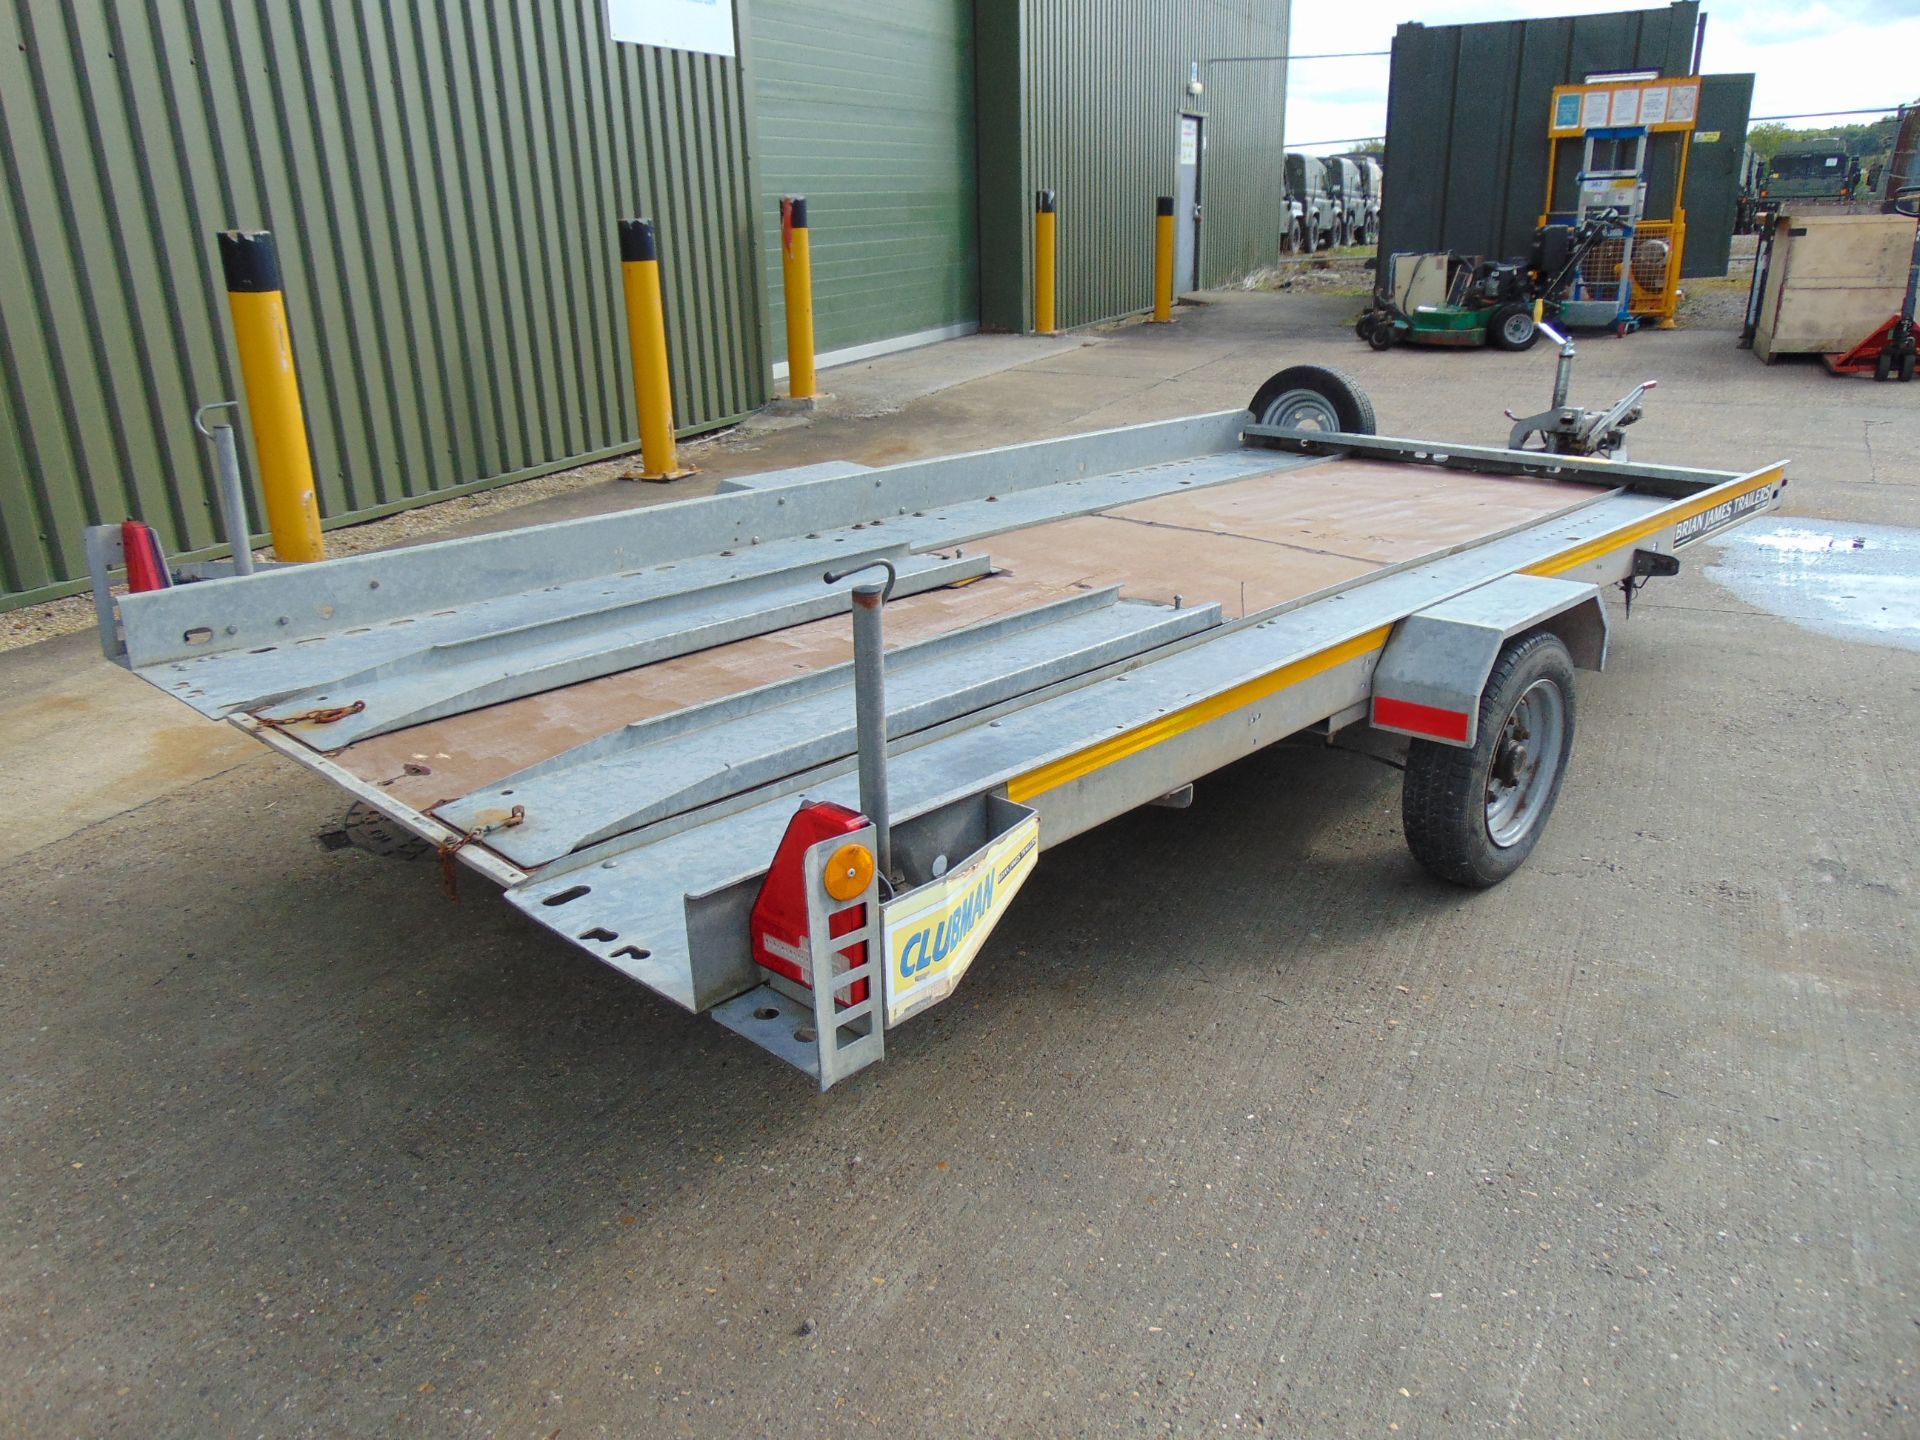 Brian James Clubman Single Axle Car Transporter Trailer with Ramps - Image 7 of 17